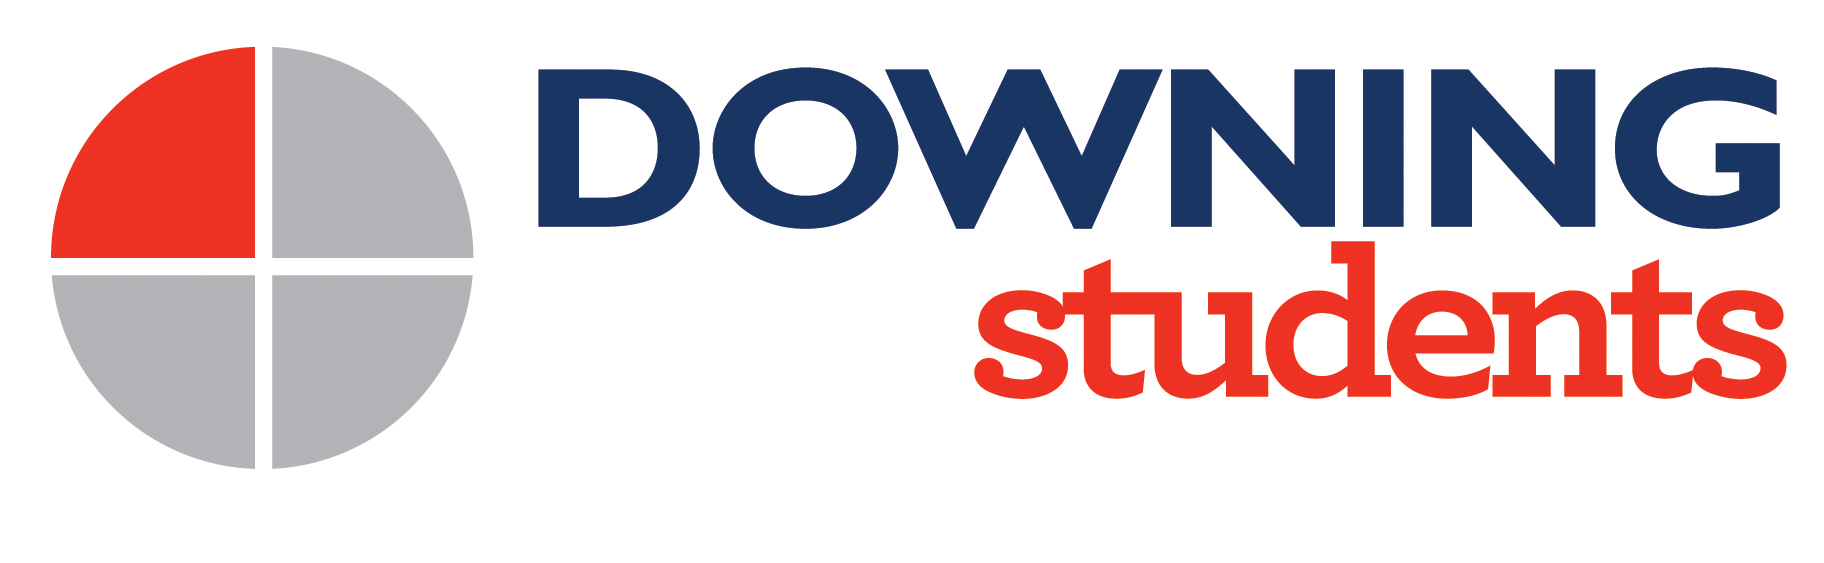 Downing Students - Student Accommodation